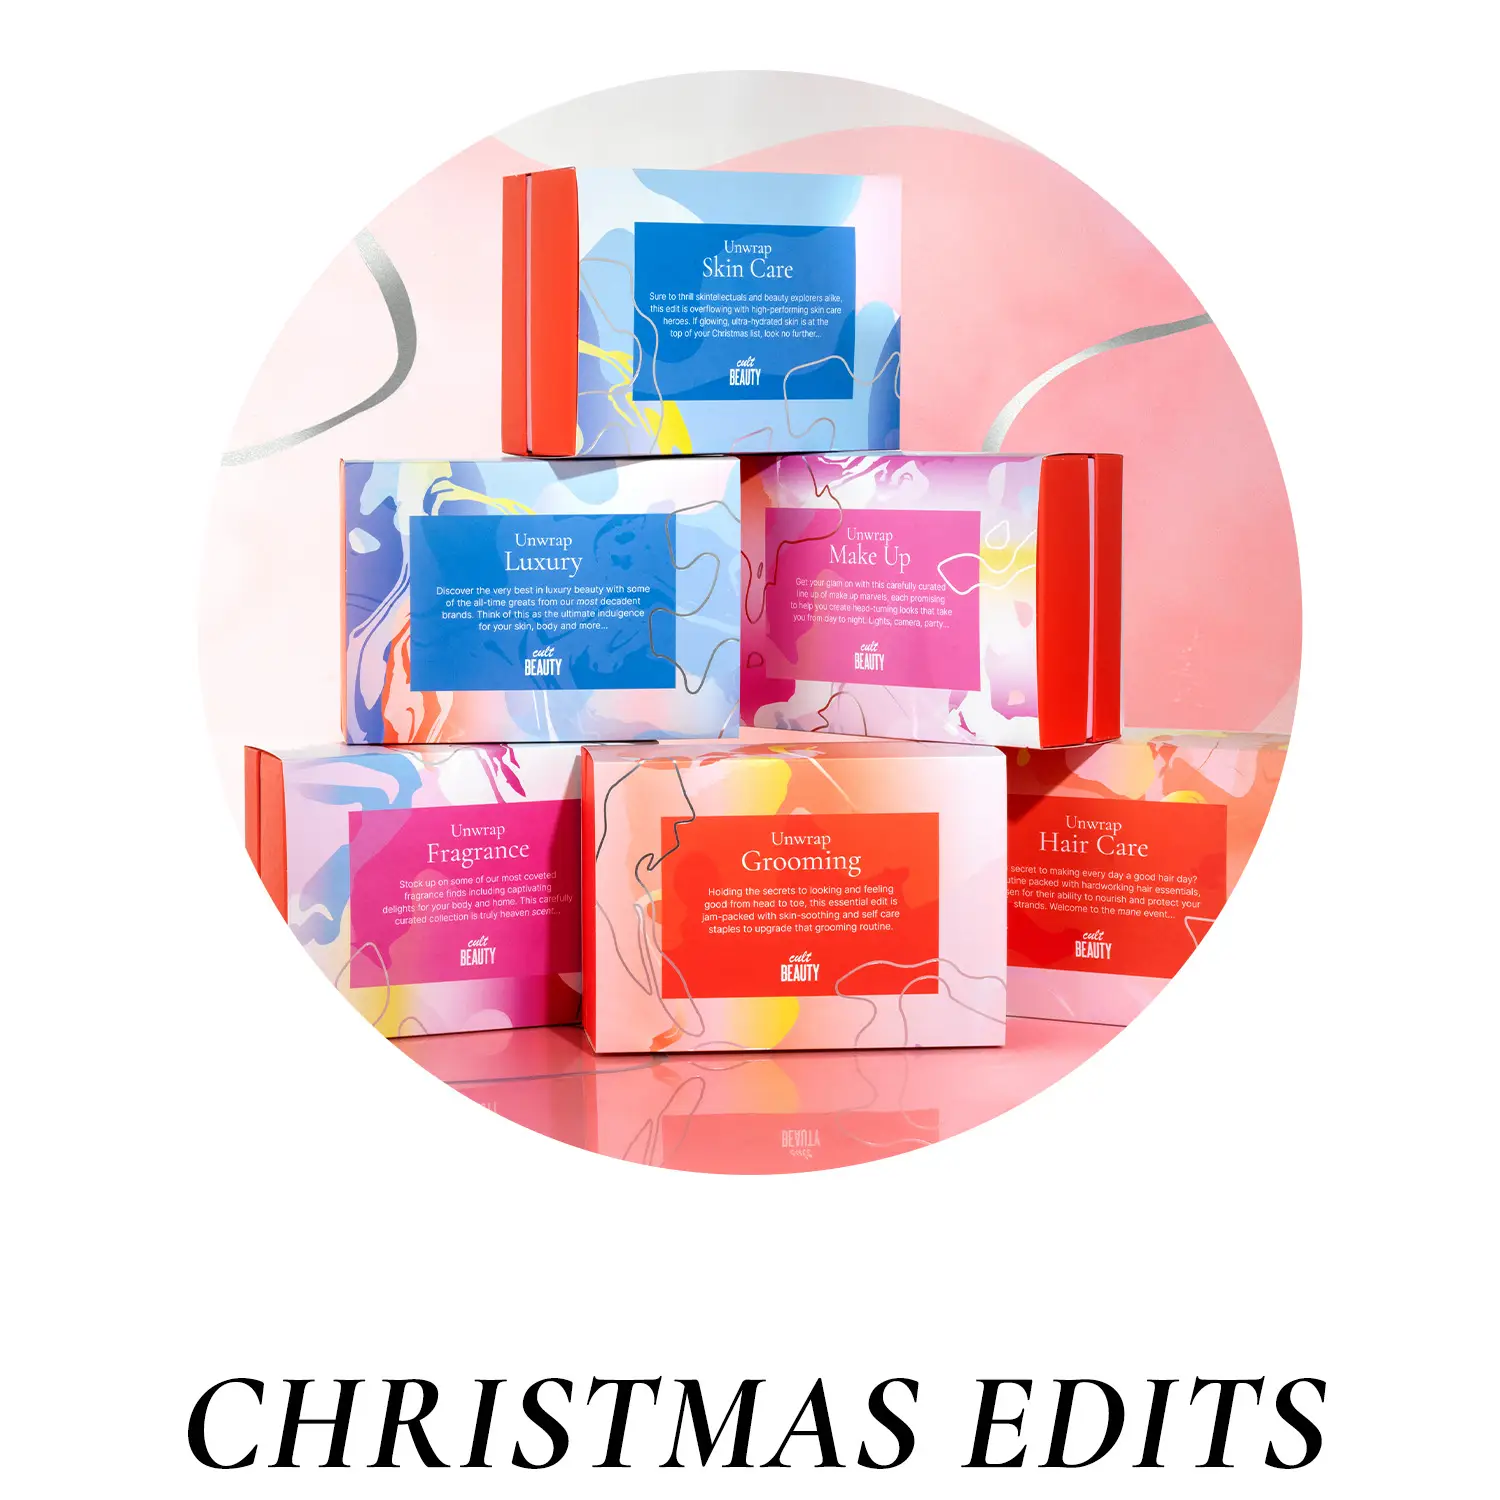 Cult Beauty Christmas Edits Are Here: Grooming, Makeup, Skincare, and more!  - Hello Subscription